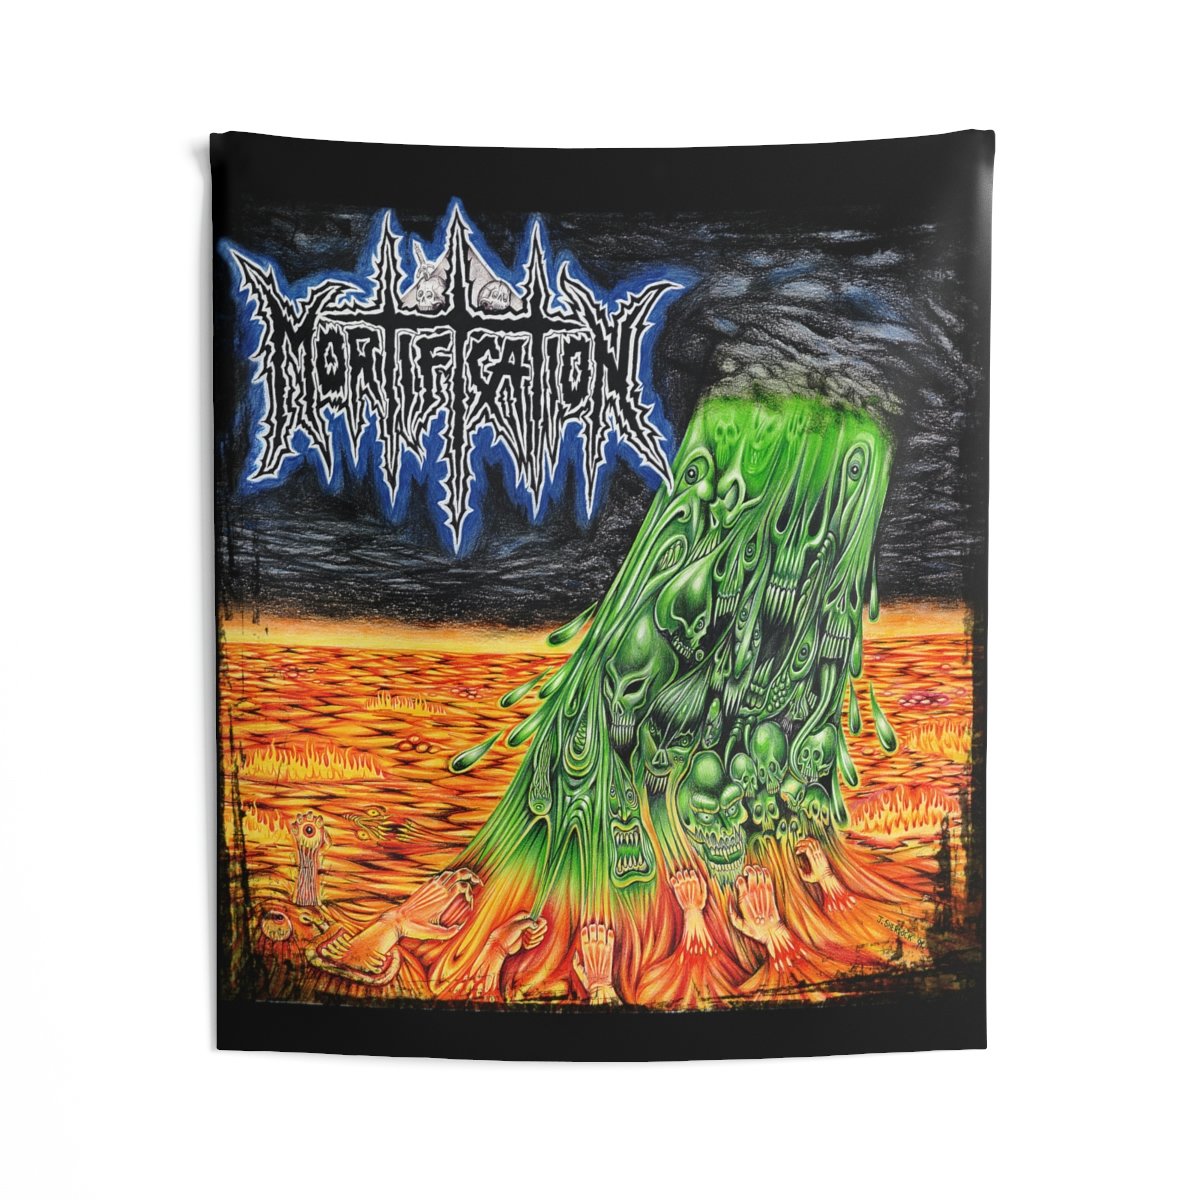 Mortification Indoor Wall Tapestries